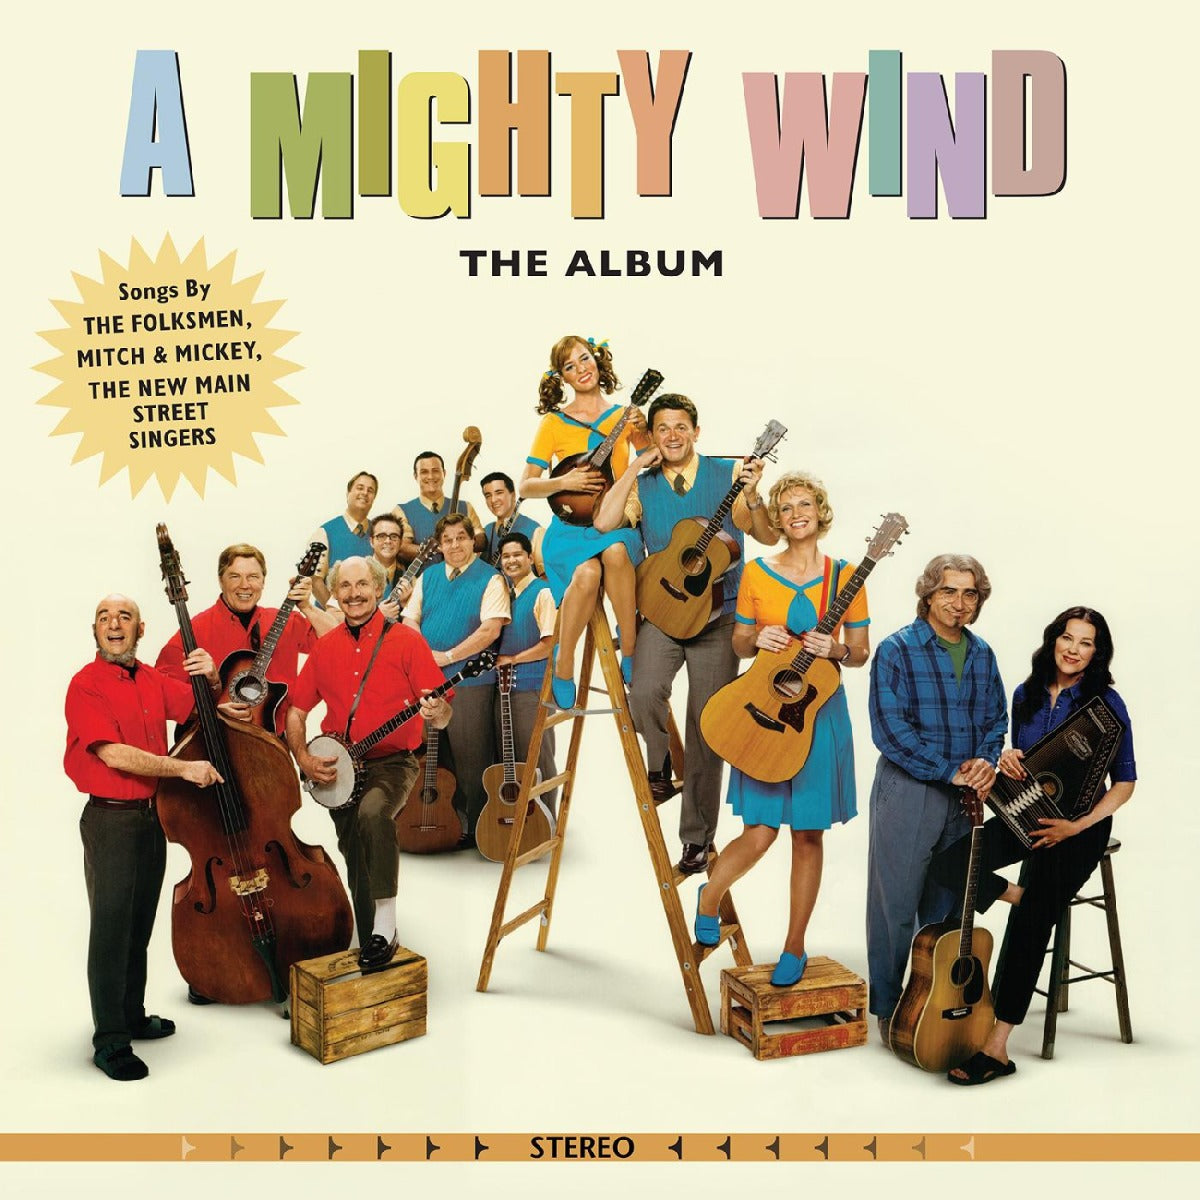 A Mighty Wind: The Album (Limited Edition, Forest Green Colored Vinyl) [Vinyl]